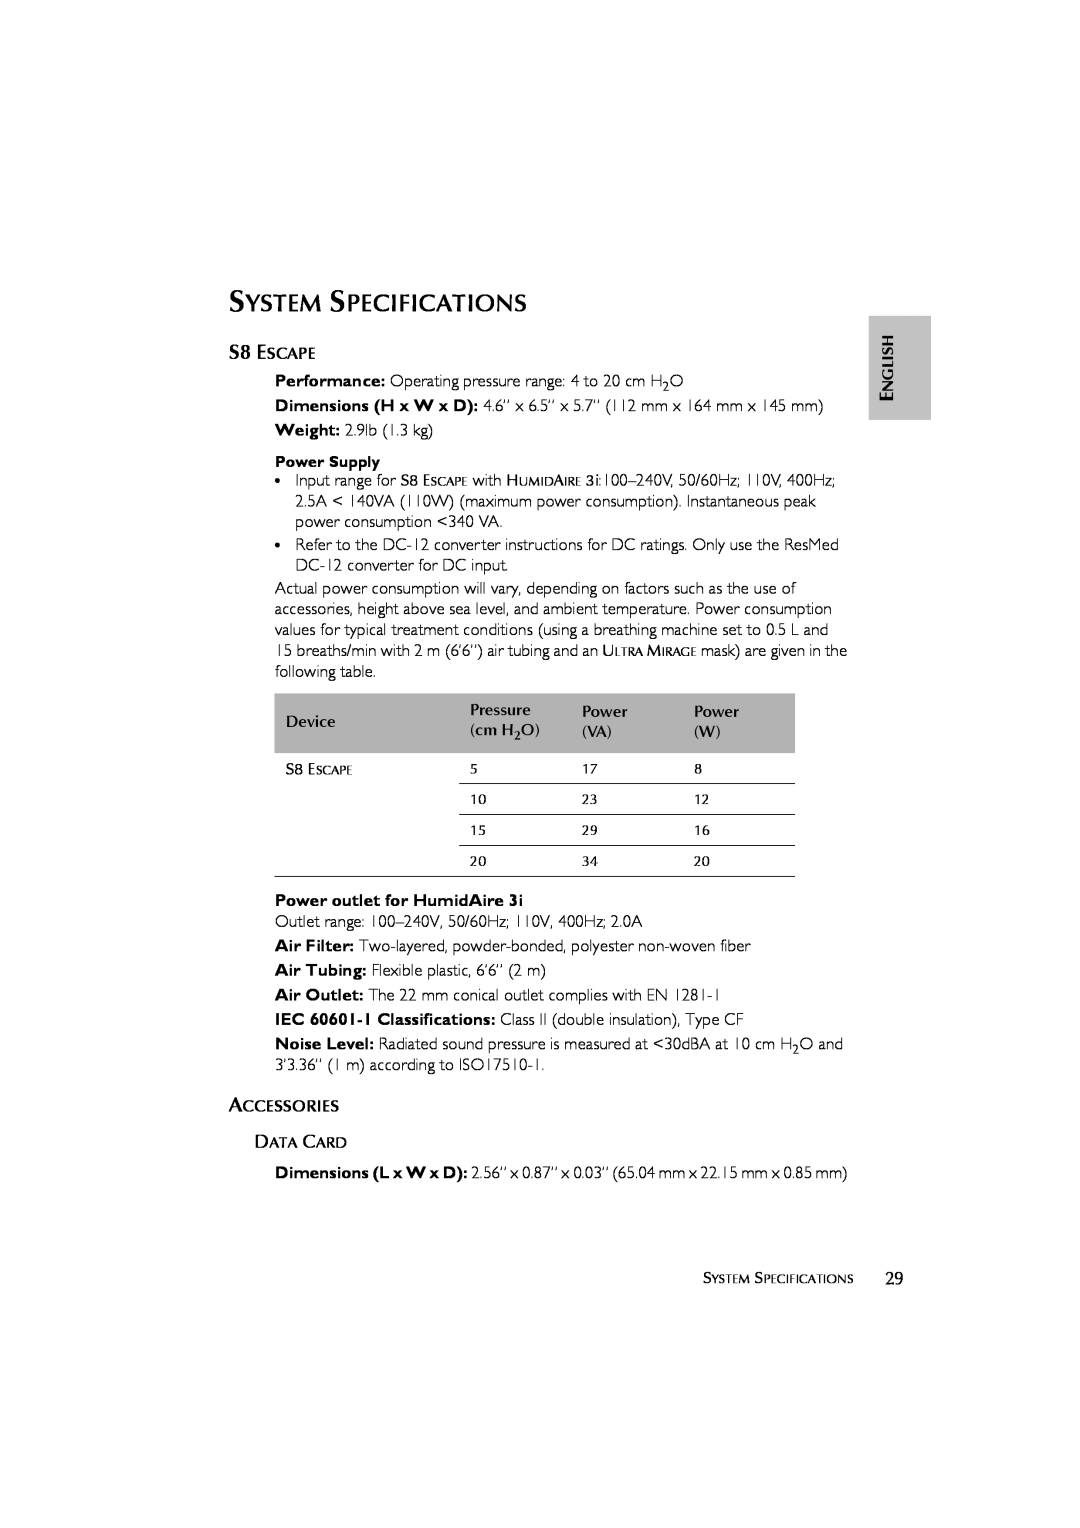 ResMed s8 user manual System Specifications, Power outlet for HumidAire 